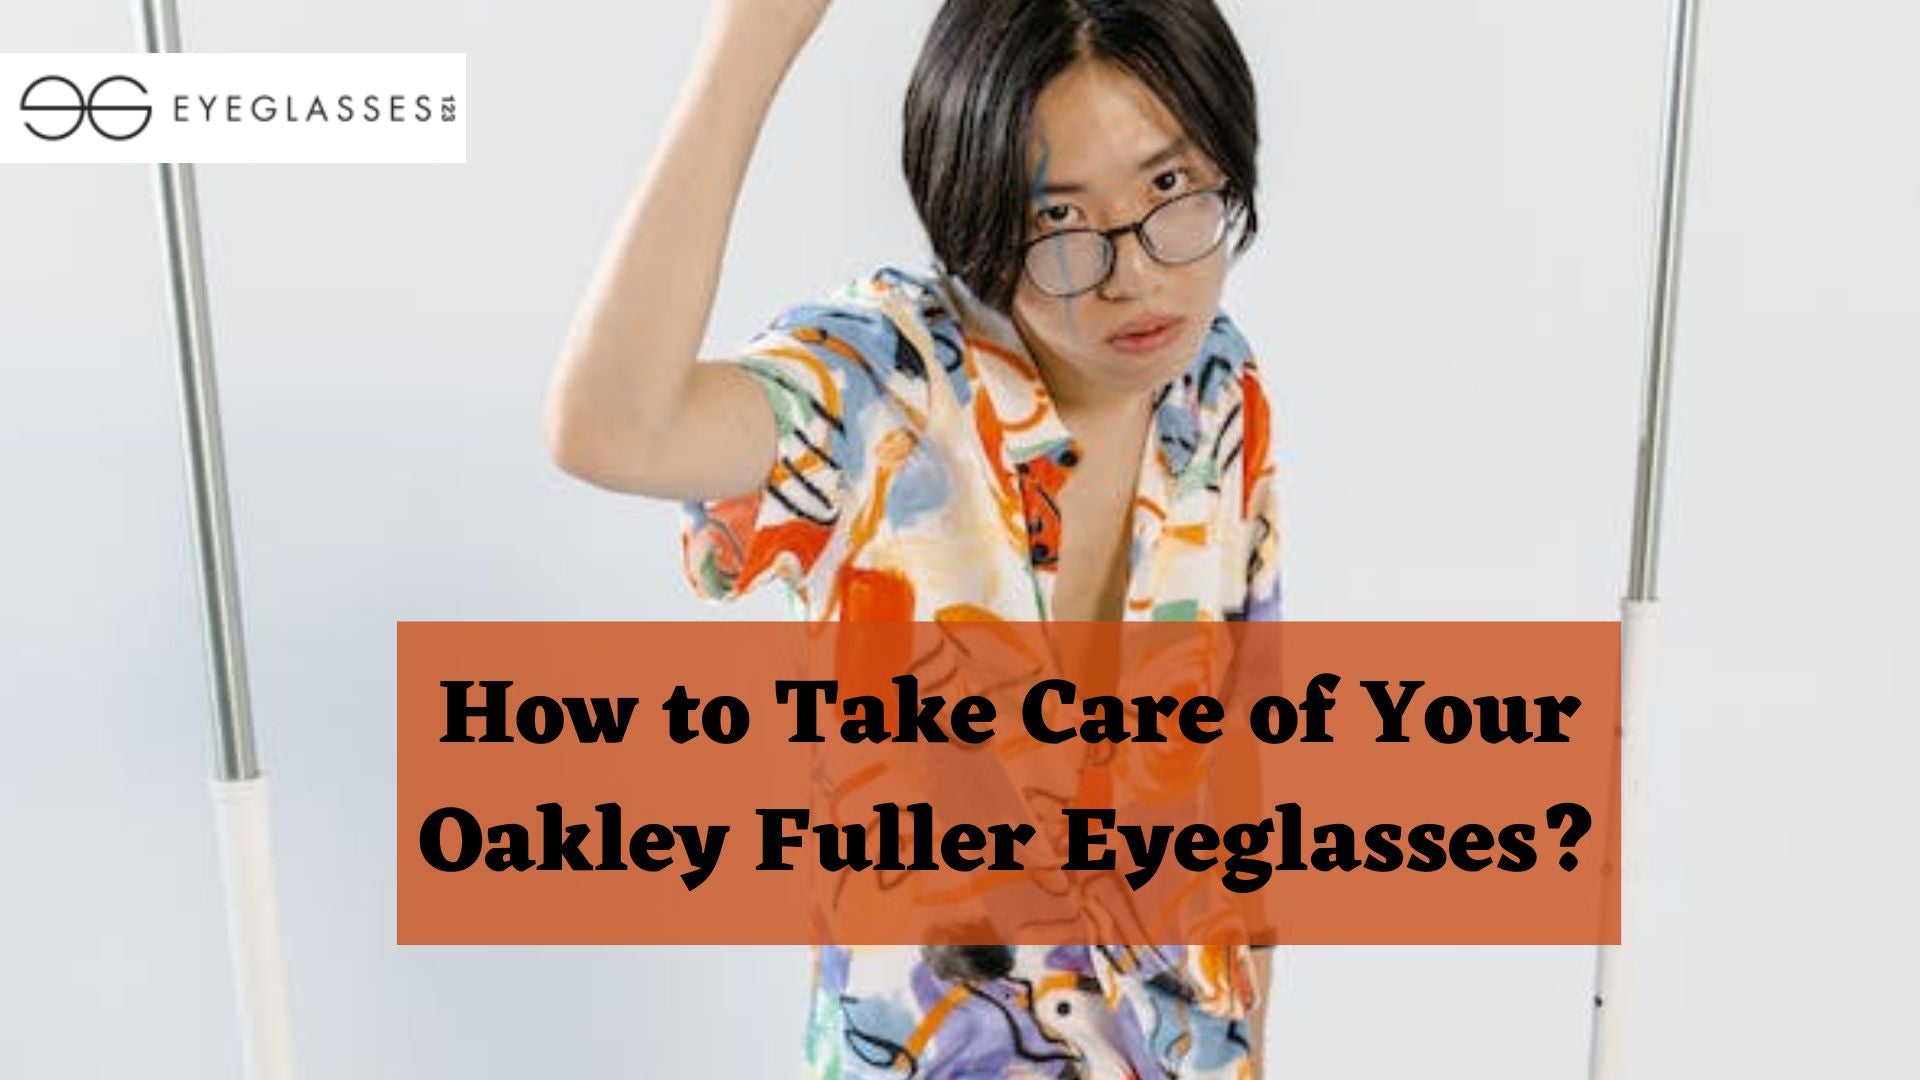 How to Take Care of Your Oakley Fuller Eyeglasses?